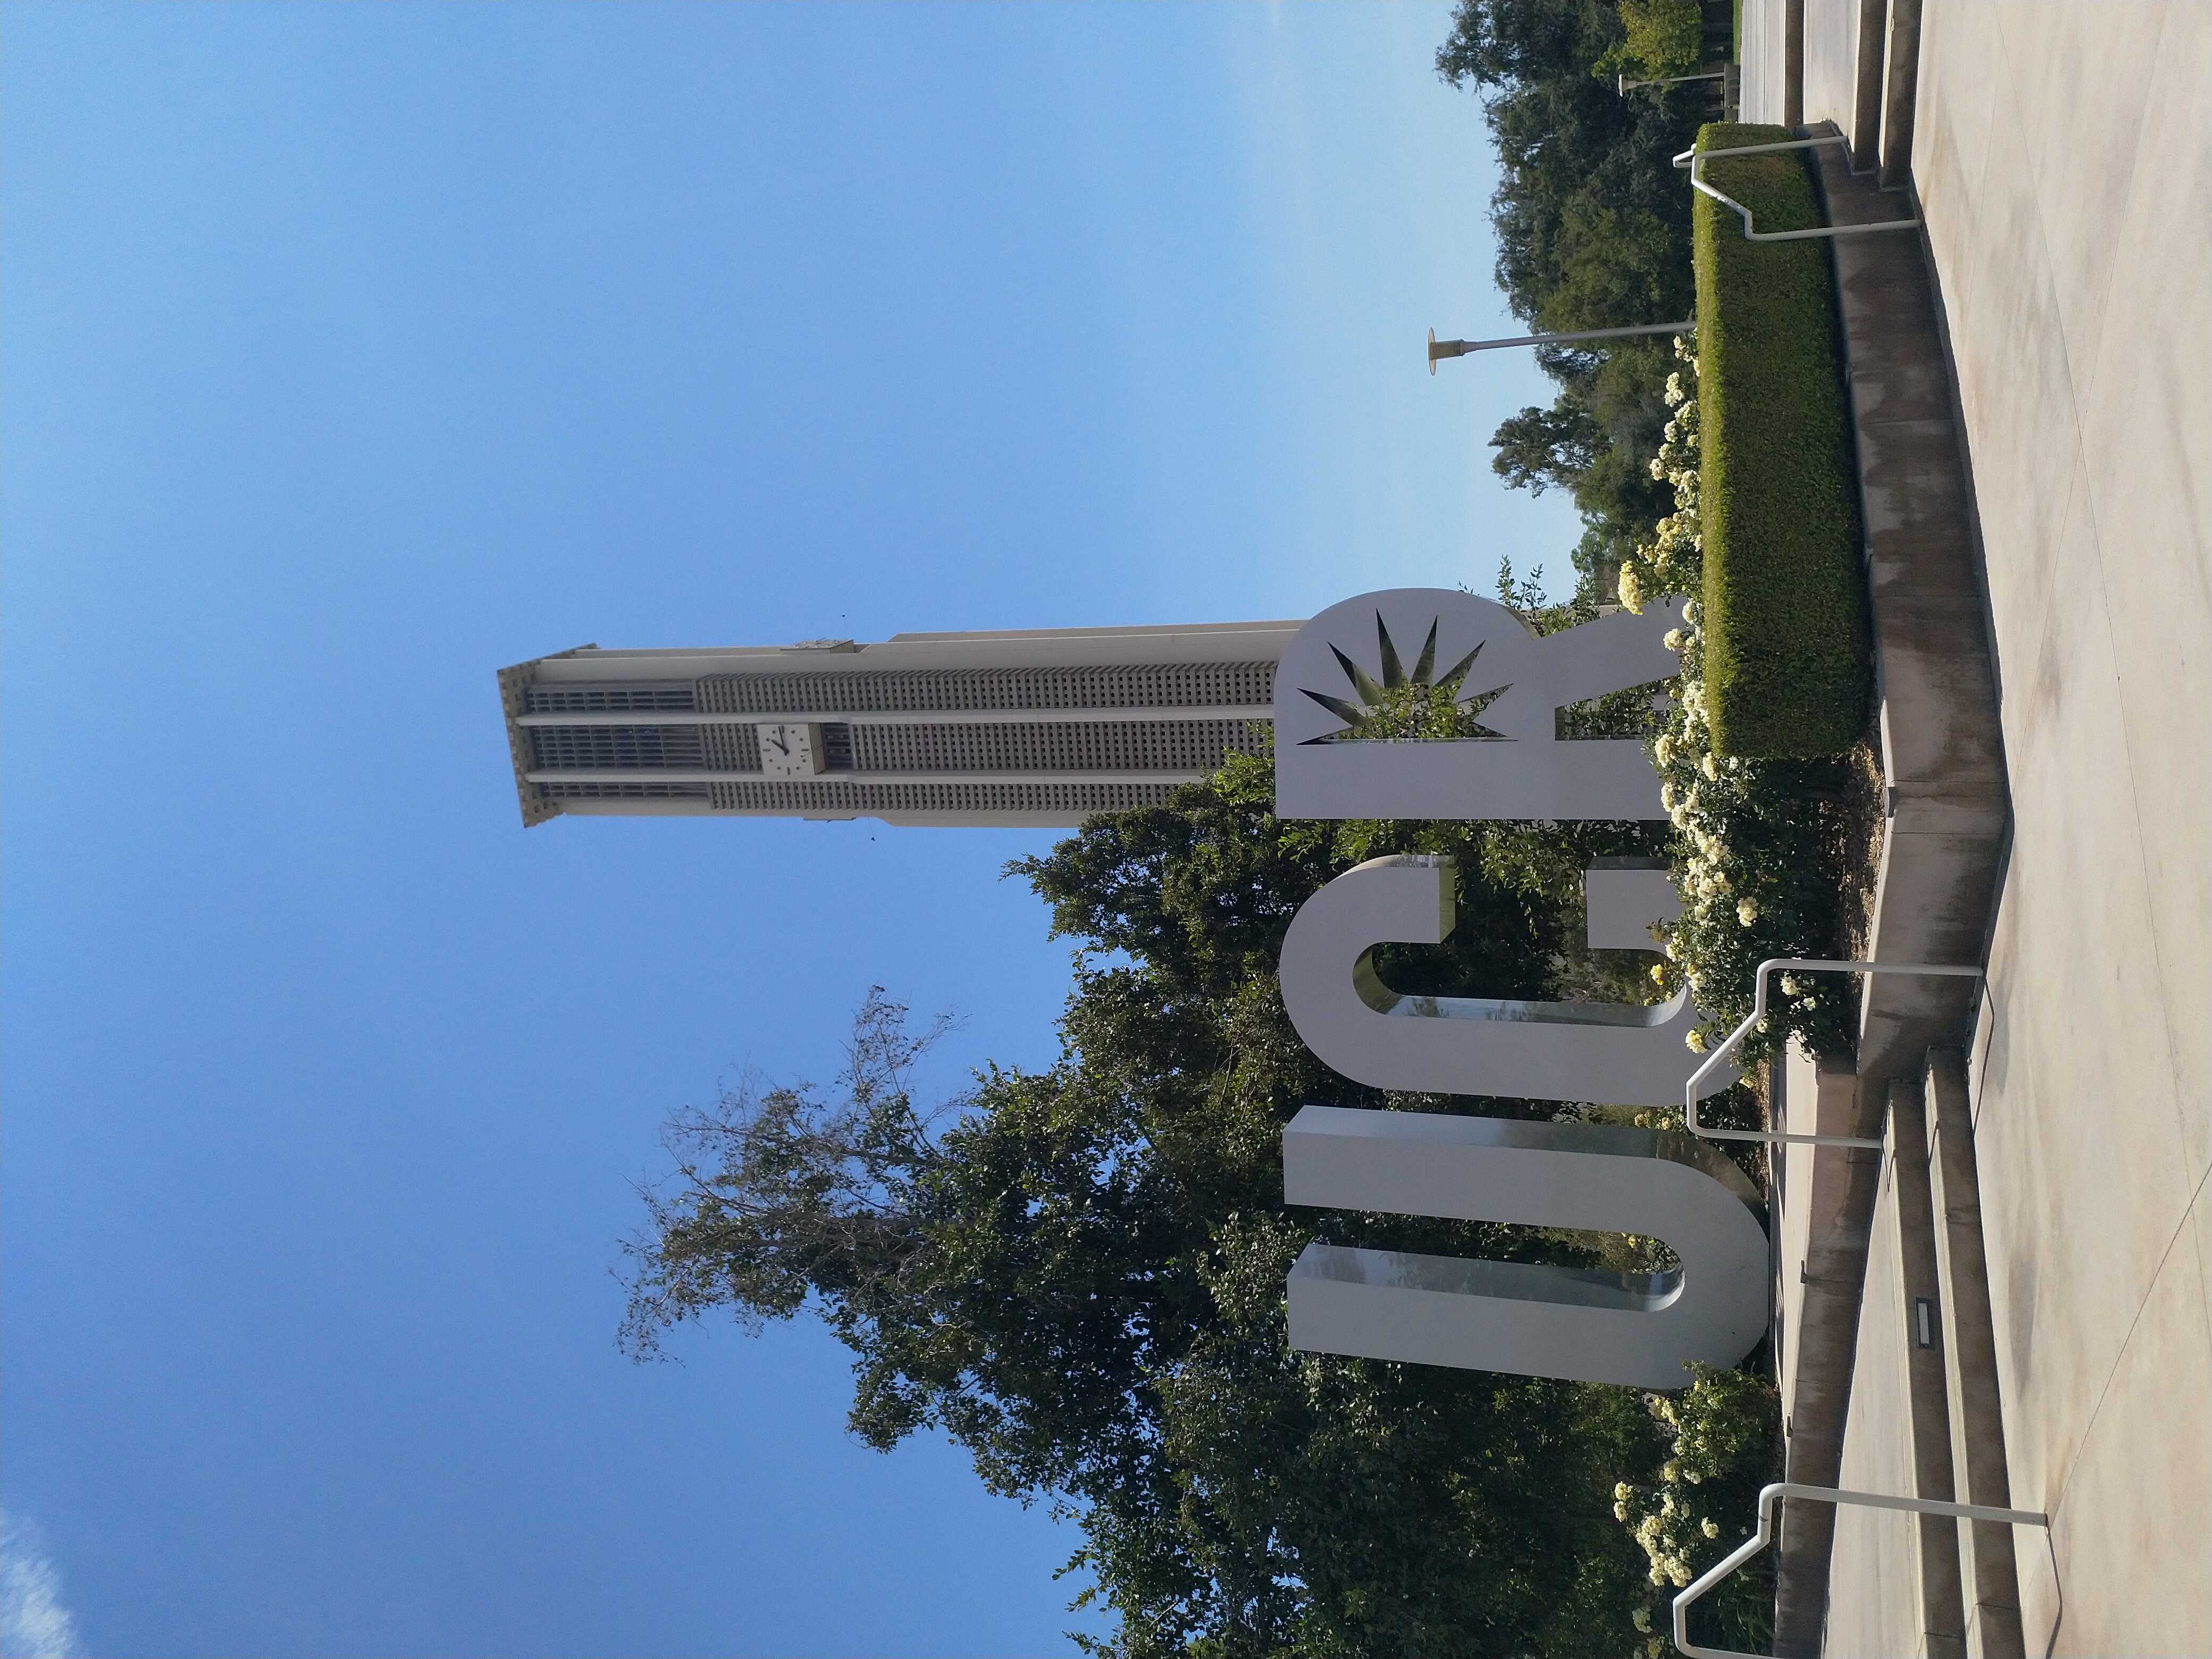 The UCR Bell Tower.